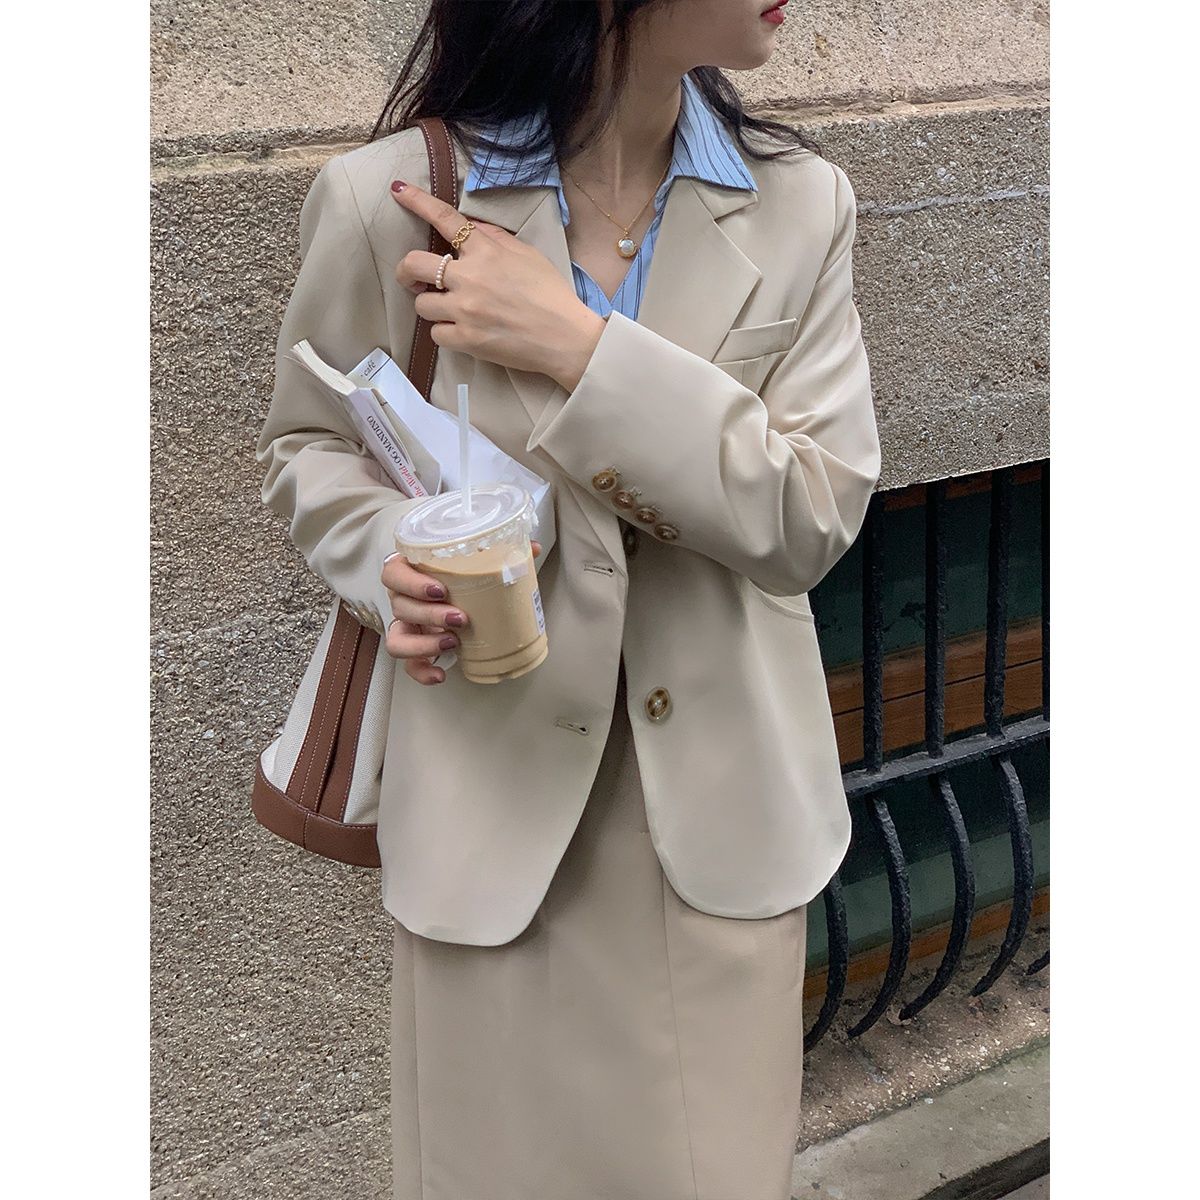 Version chao positive small chic pocket casual suit female small shoulder pads spring and autumn coat